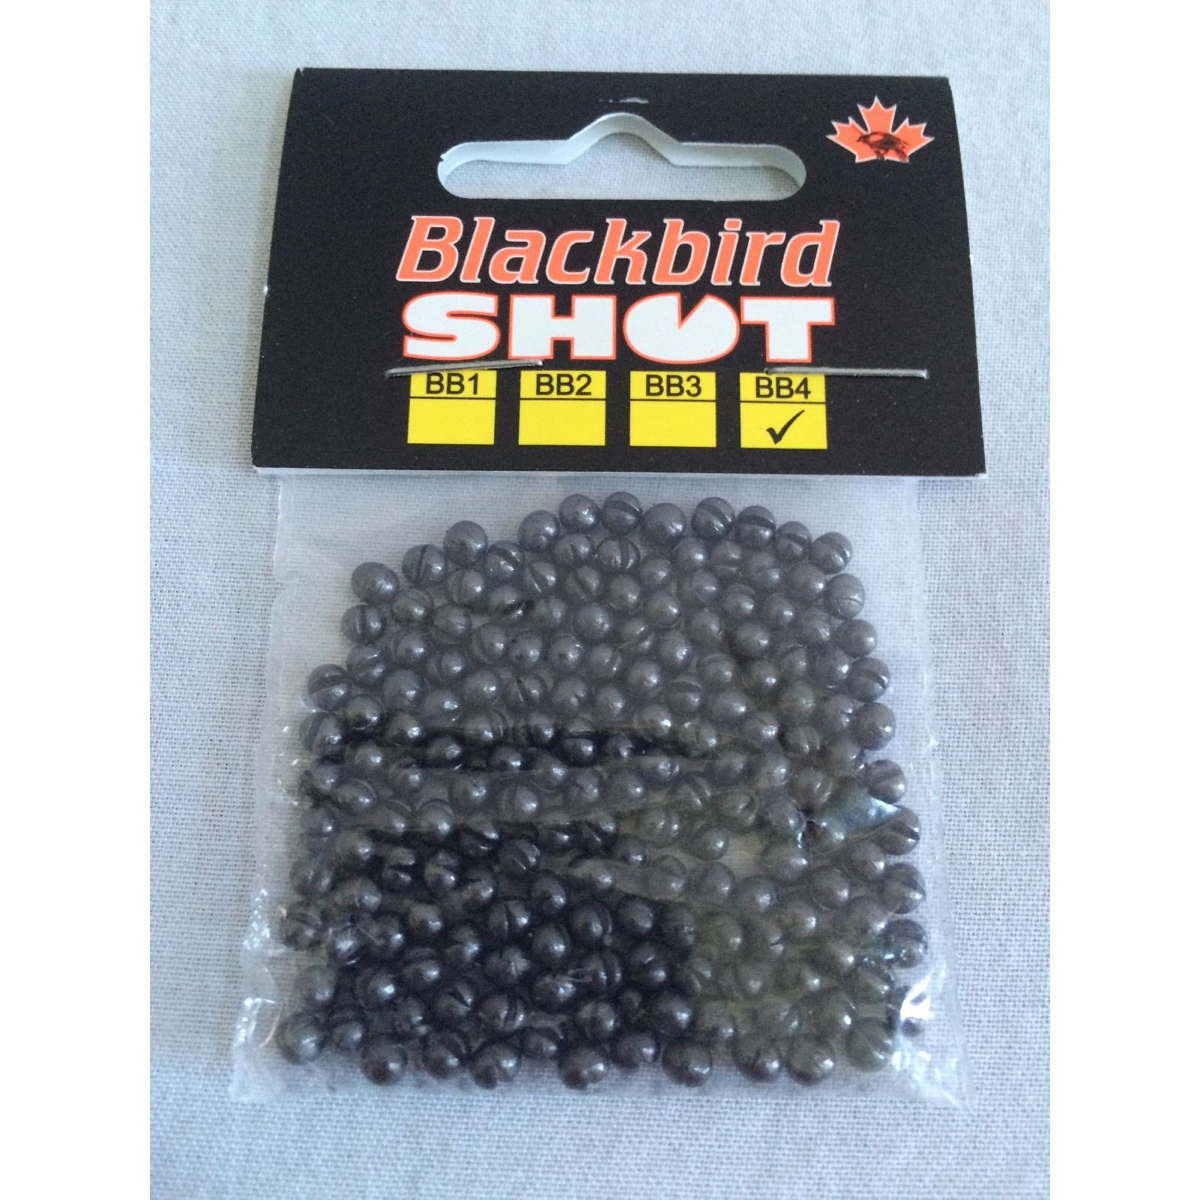 Photo of Redwing Tackle Blackbird Shot Refill Bags for sale at United Tackle Shops.